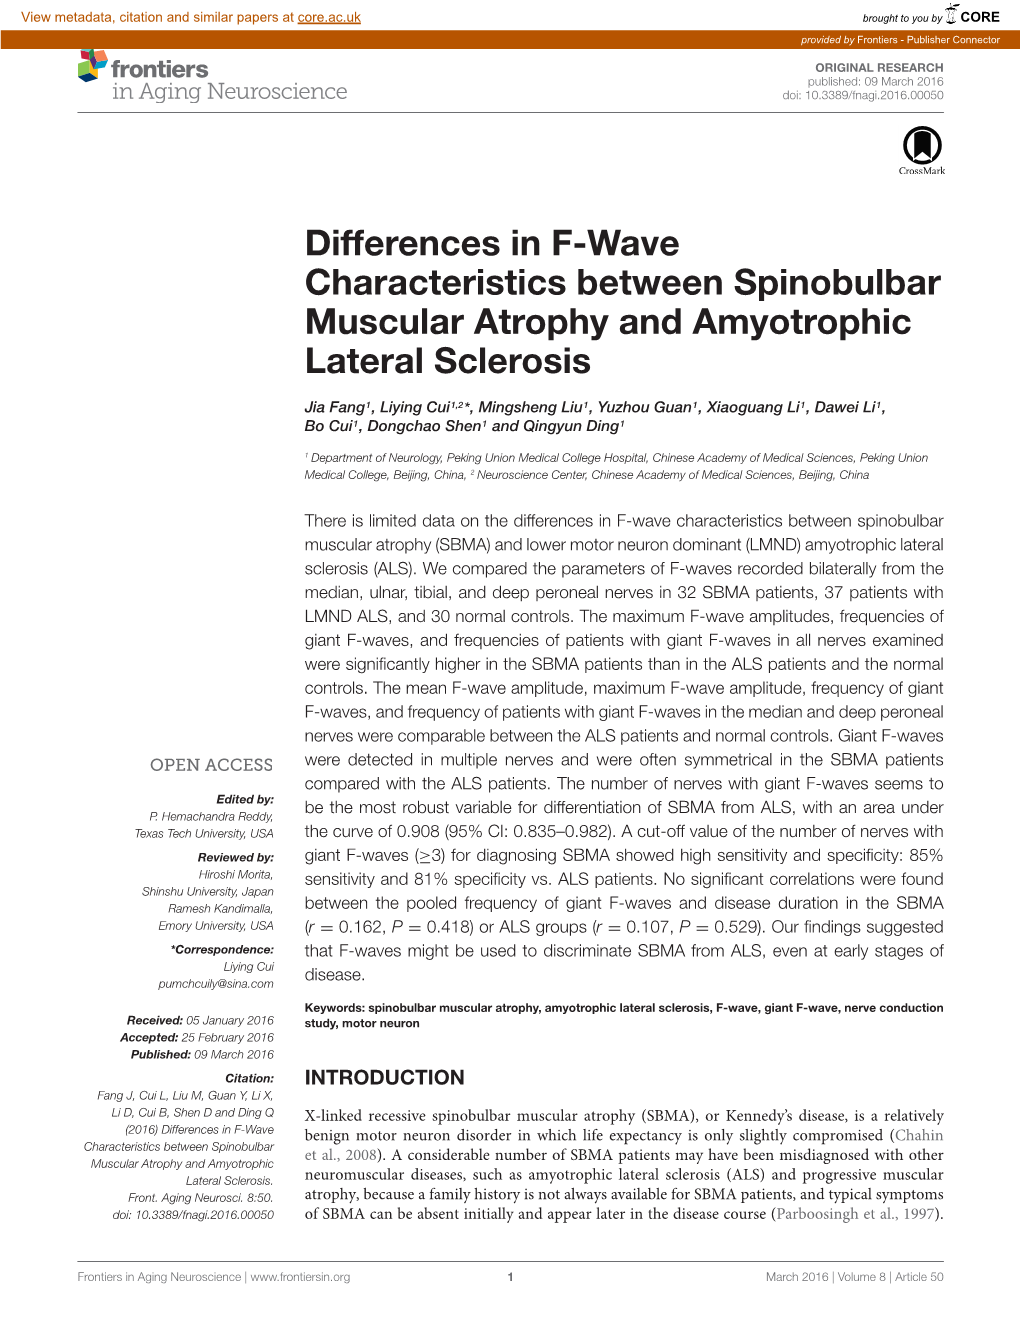 Differences in F-Wave Characteristics Between Spinobulbar Muscular Atrophy and Amyotrophic Lateral Sclerosis